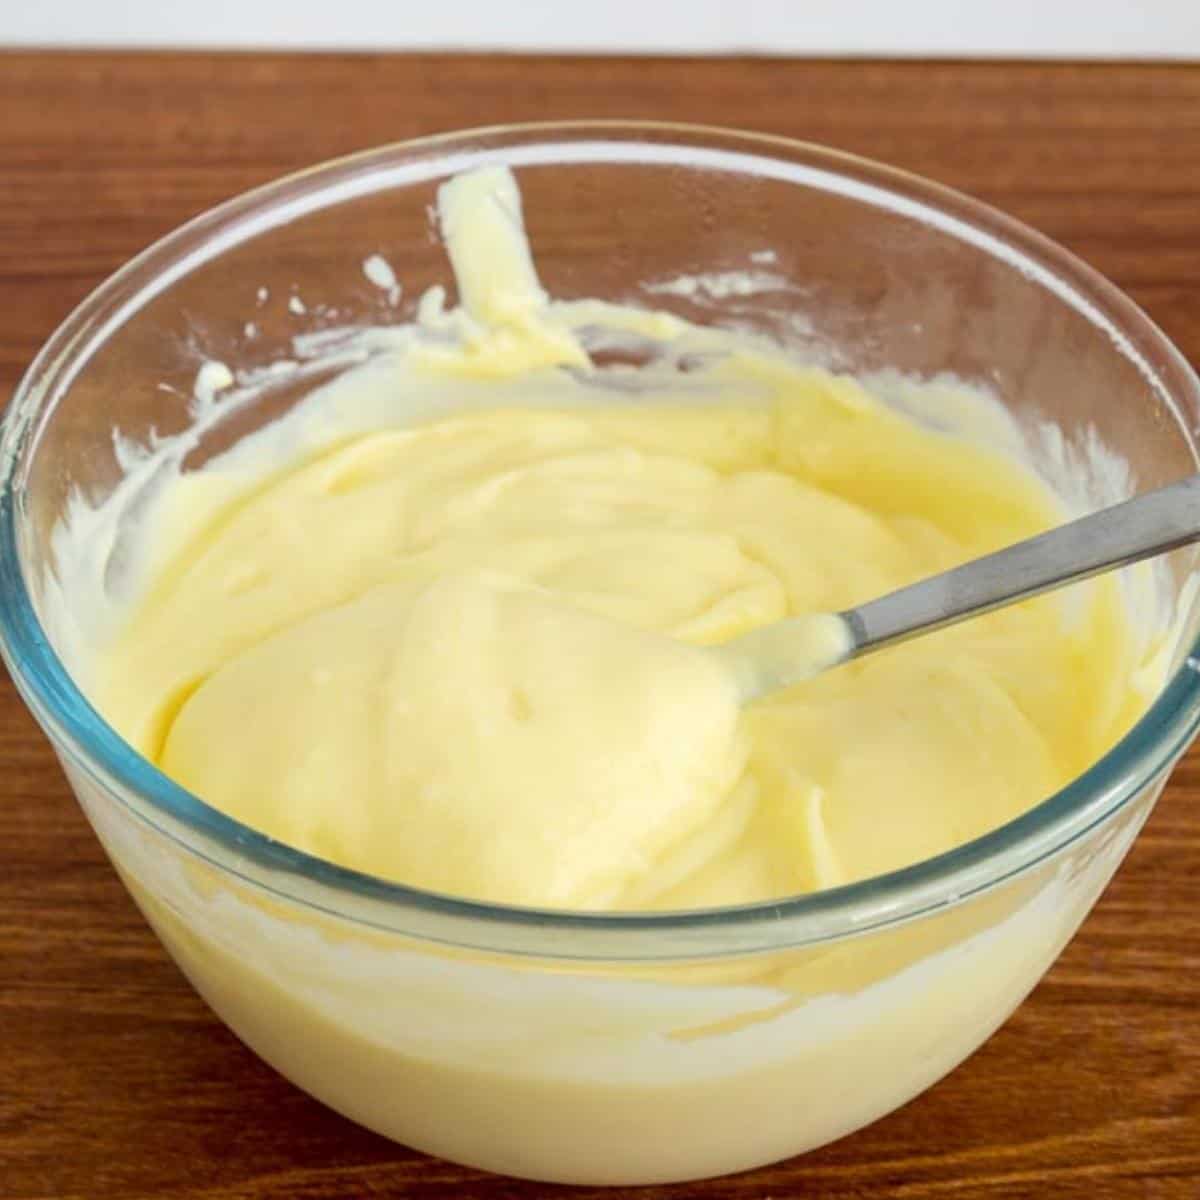 Pastry cream in a bowl.